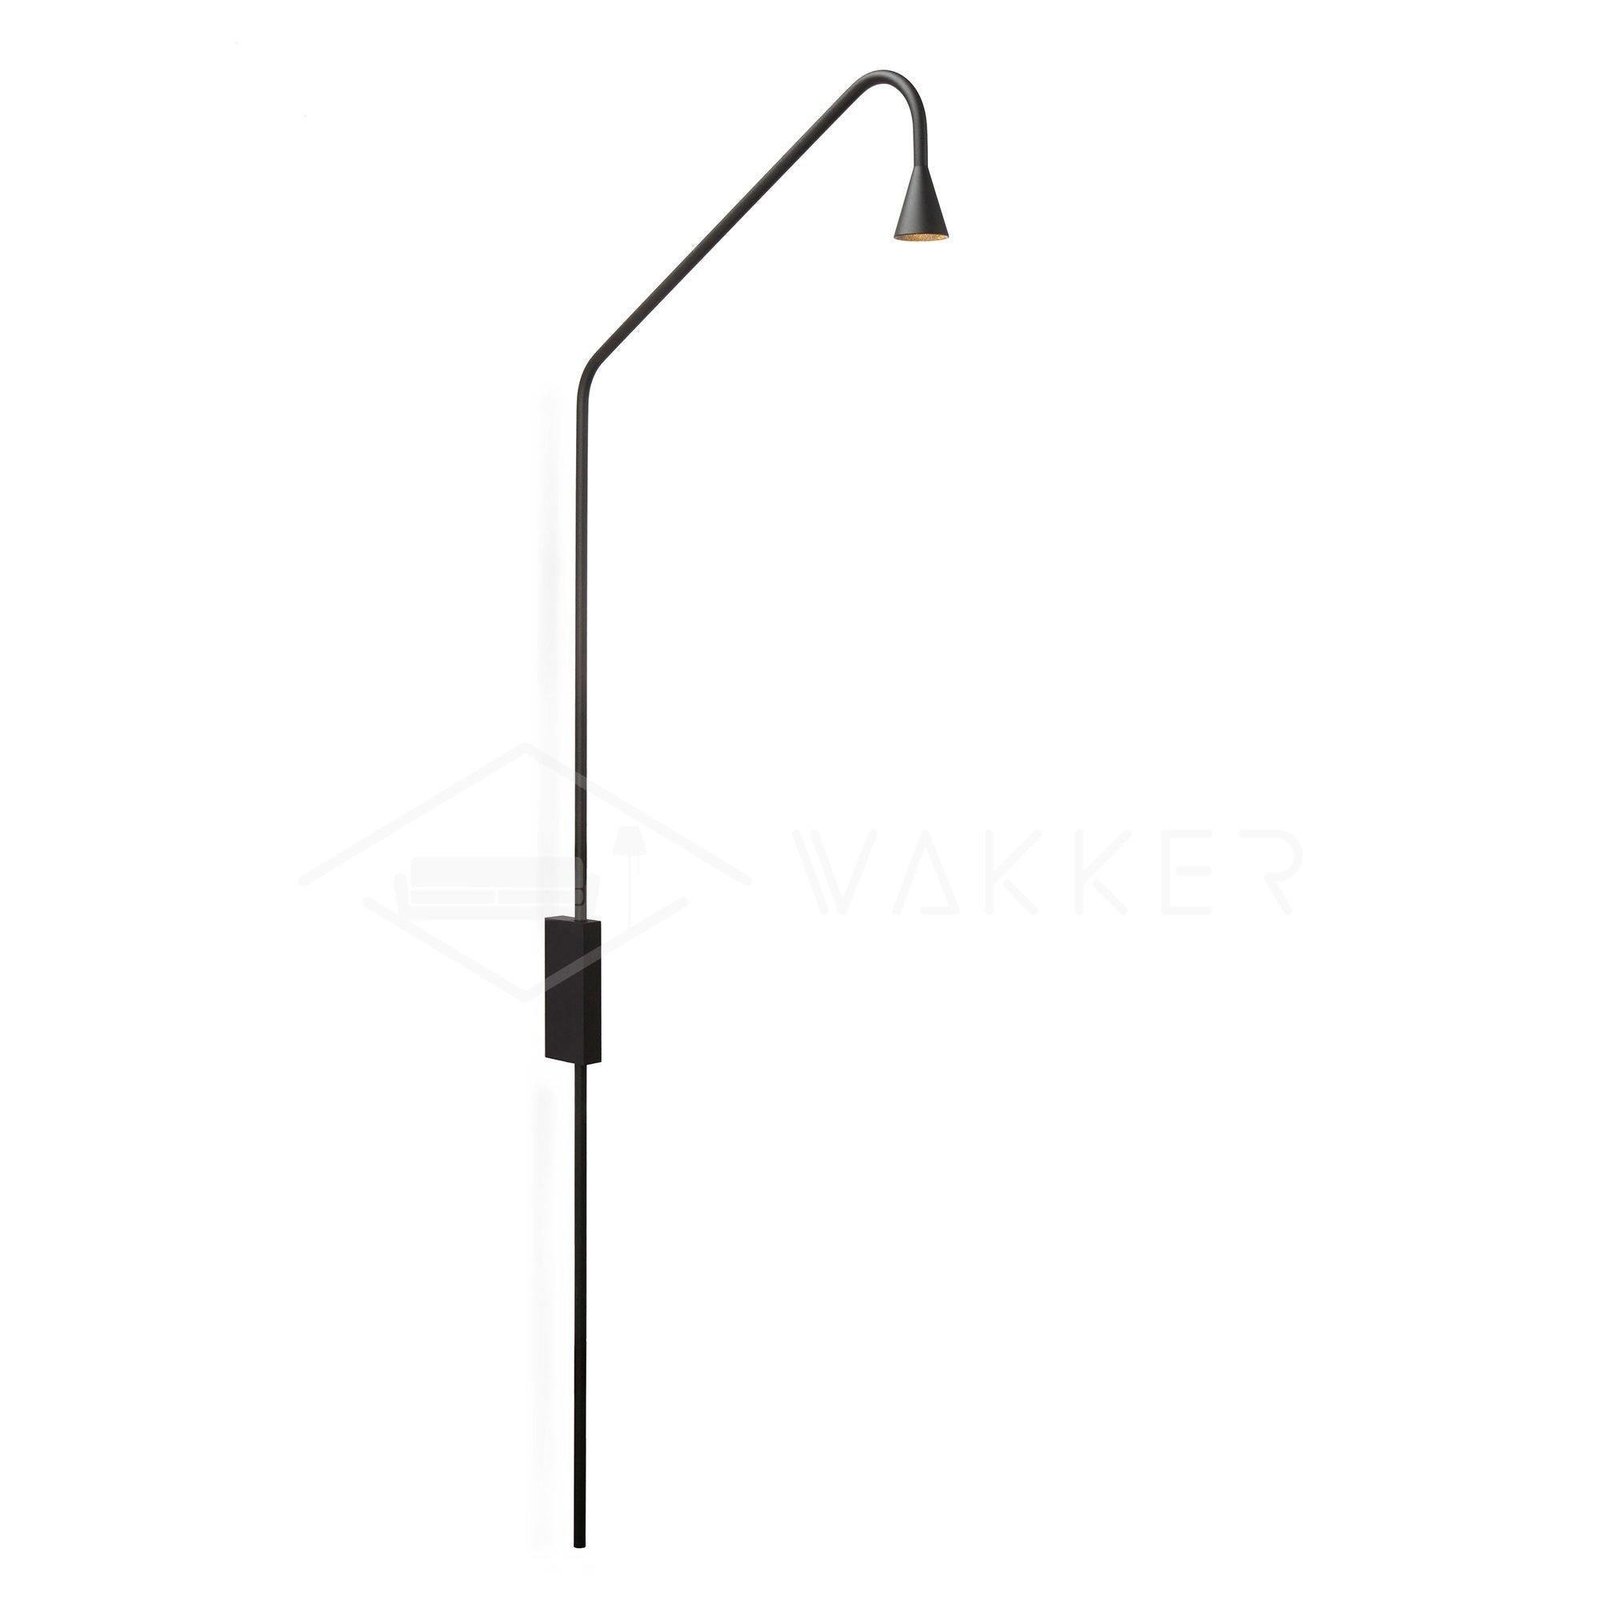 Austere Wall Sconce, Black, Diameter 17.7 inches x Height 45.3 inches (45cm x 115cm), EU plug.